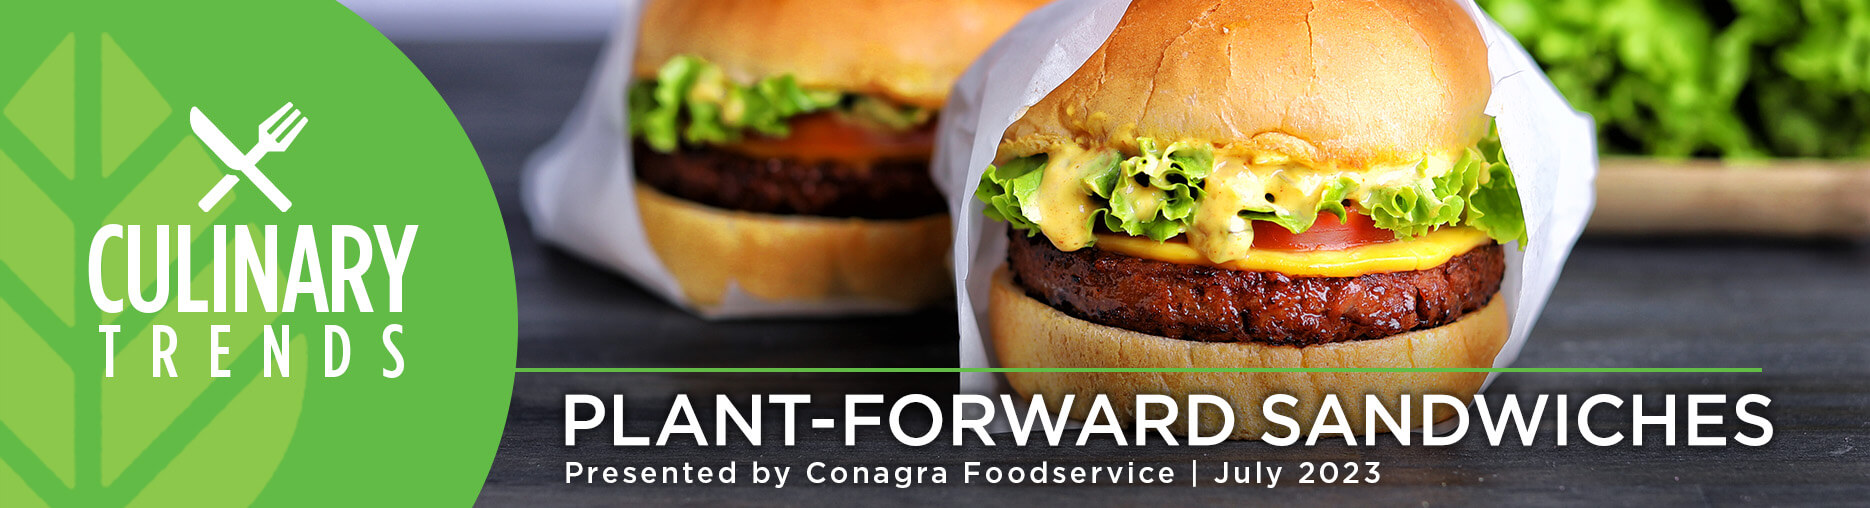 Culinary Trends July 2023, presented by Conagra Foodservice: Plant-Forward Sandwiches